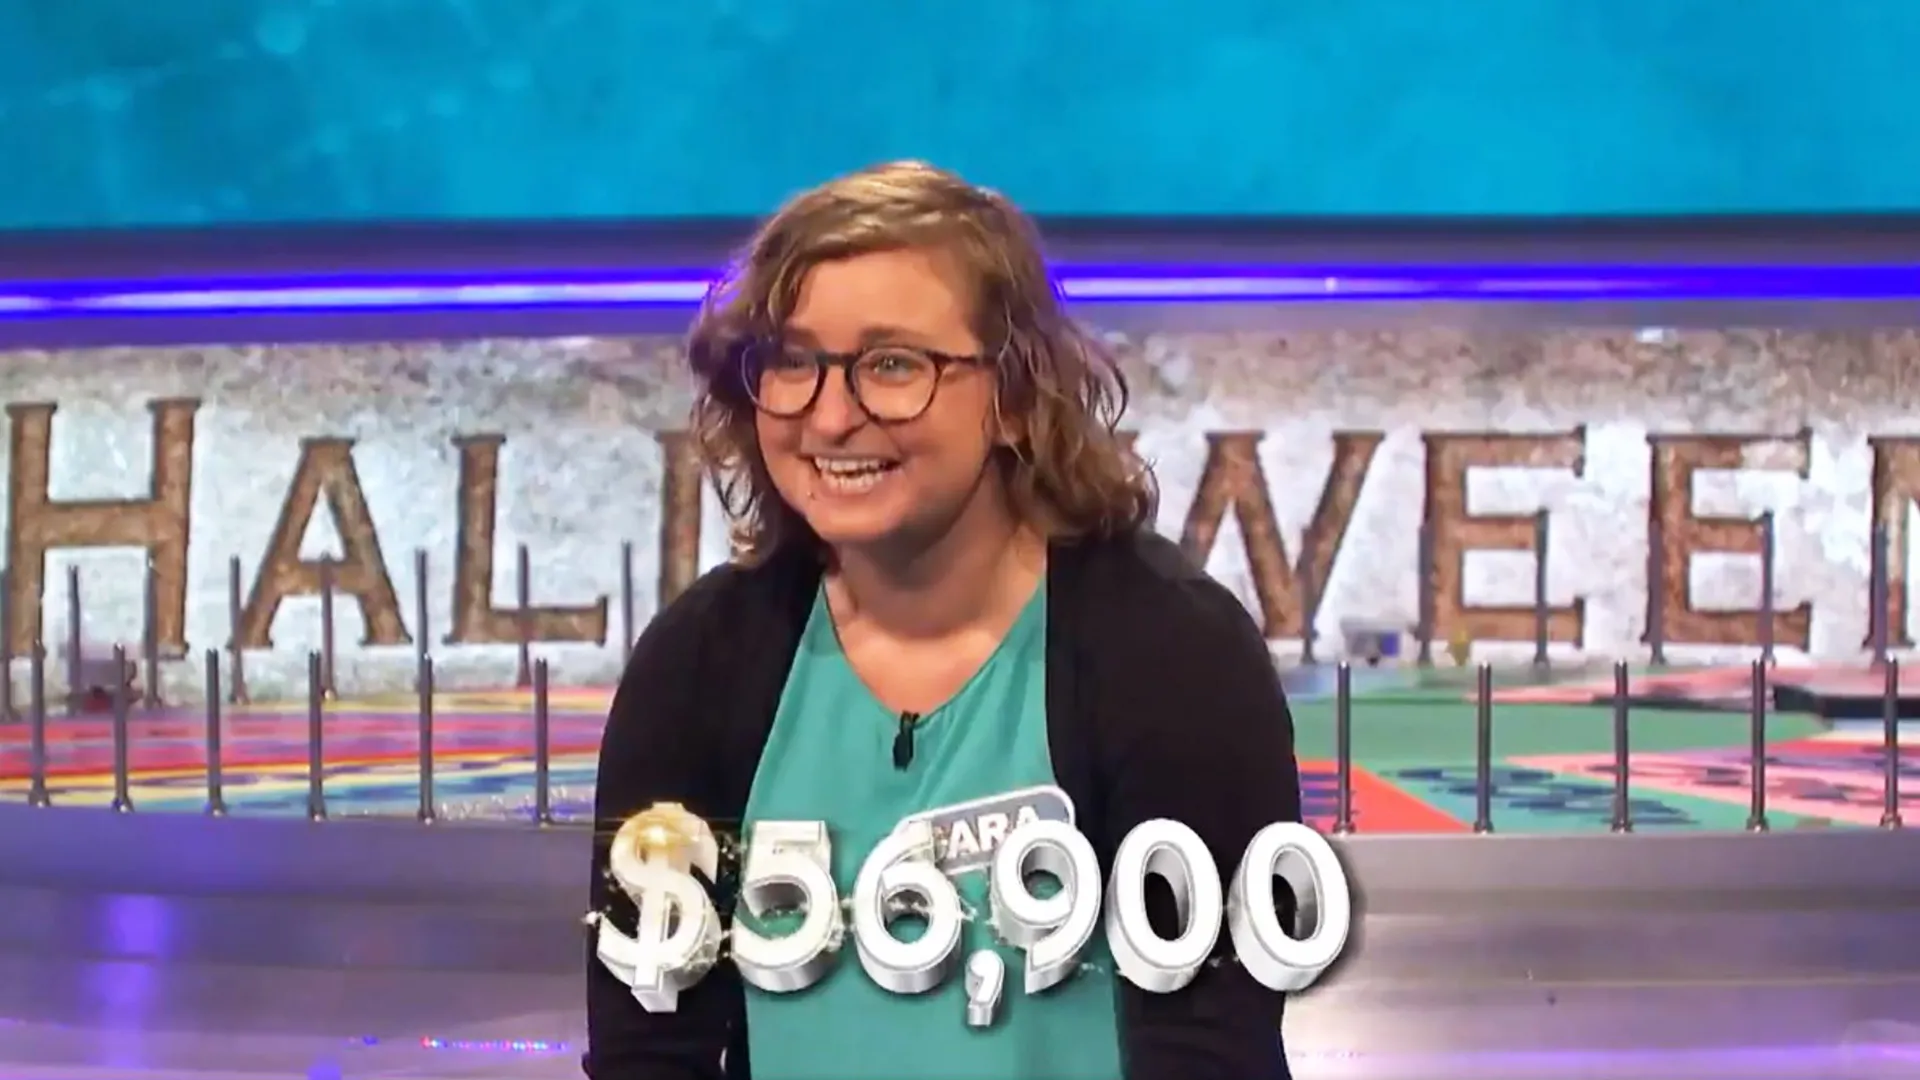 Sara Callori, an associate professor of physics, competed on the game show. The episode aired on Oct. 28 on KABC 7 Los Angeles.